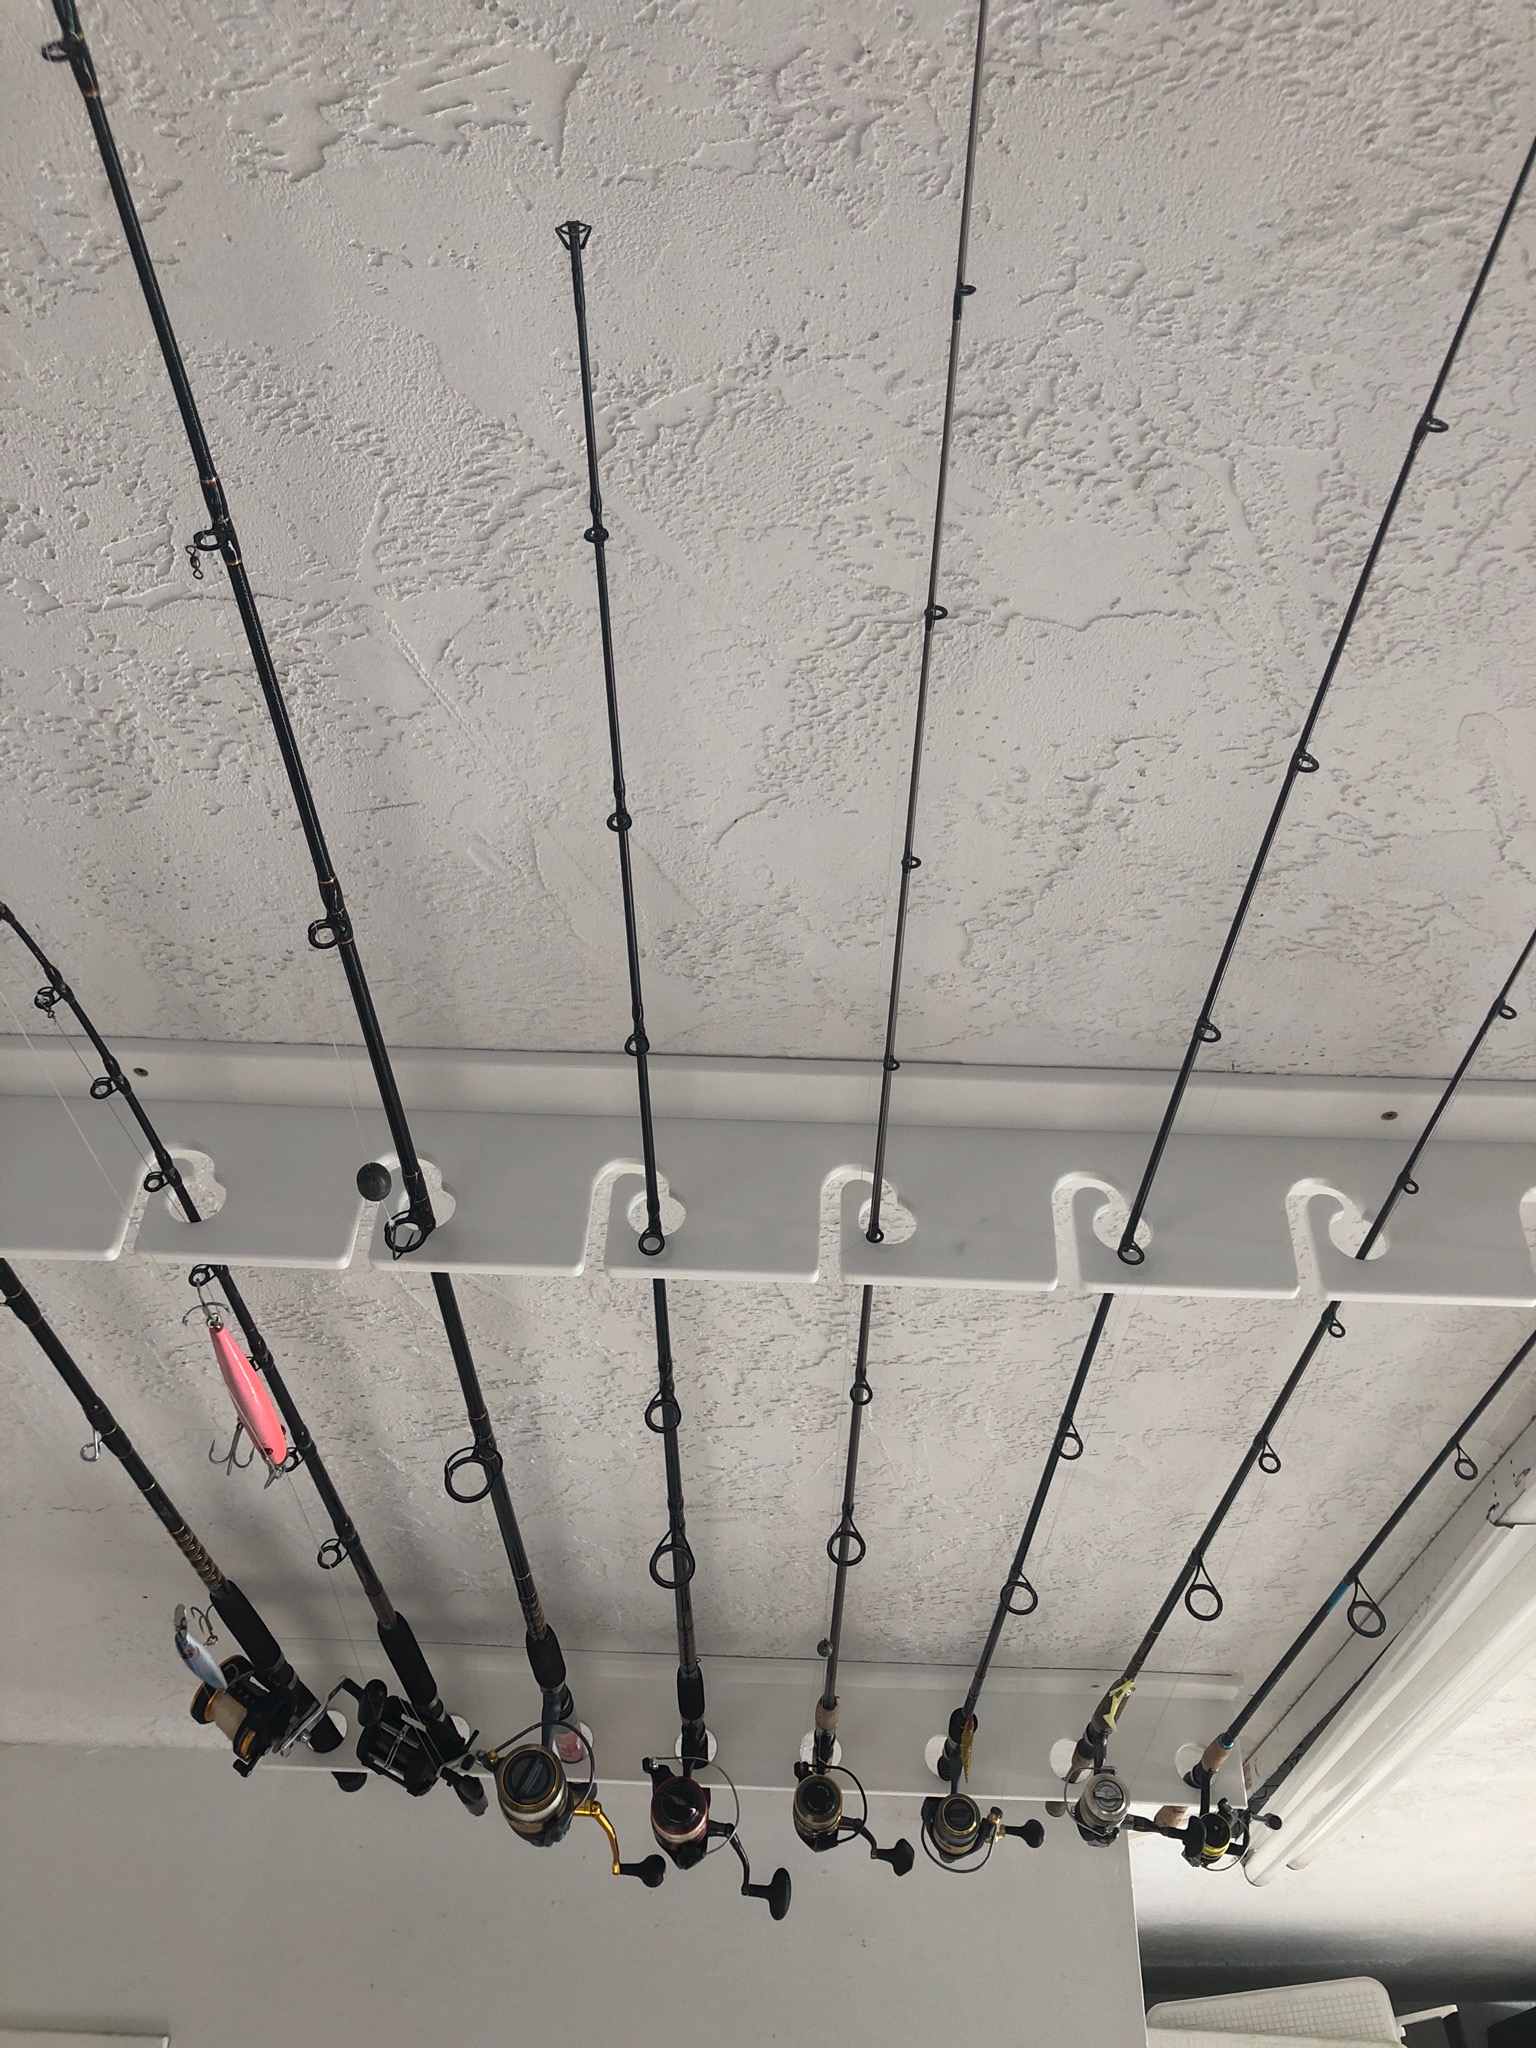 ceiling fishing rod rack, ceiling fishing rod rack Suppliers and